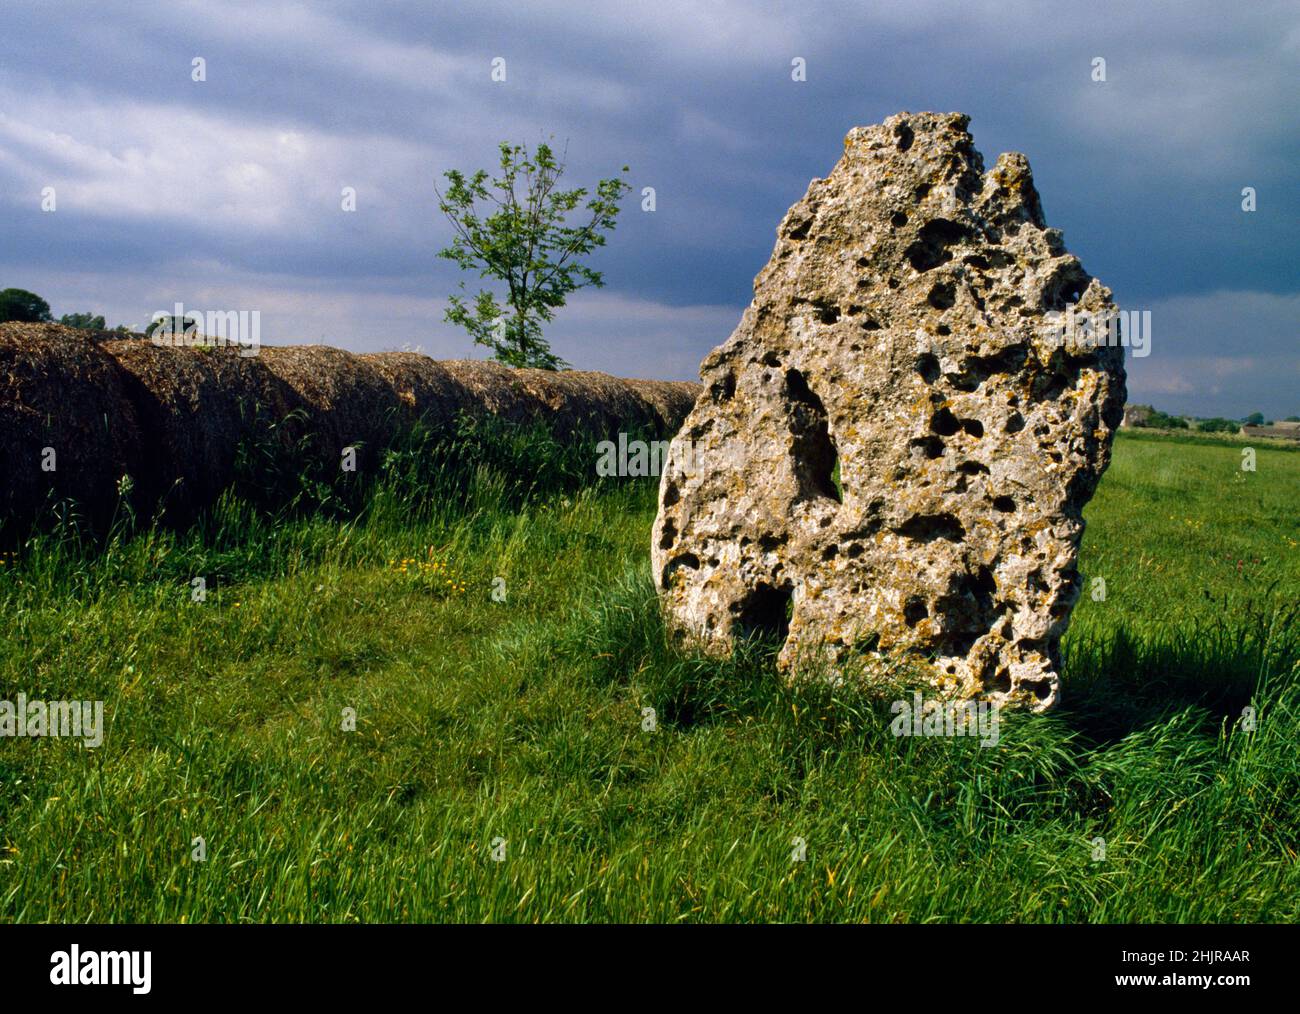 View NNE of the Long Stone standing stone, Minchinhampton, Gloucestershire, England, UK. A naturally holed slab of local oolitic limestone 2.1m high. Stock Photo